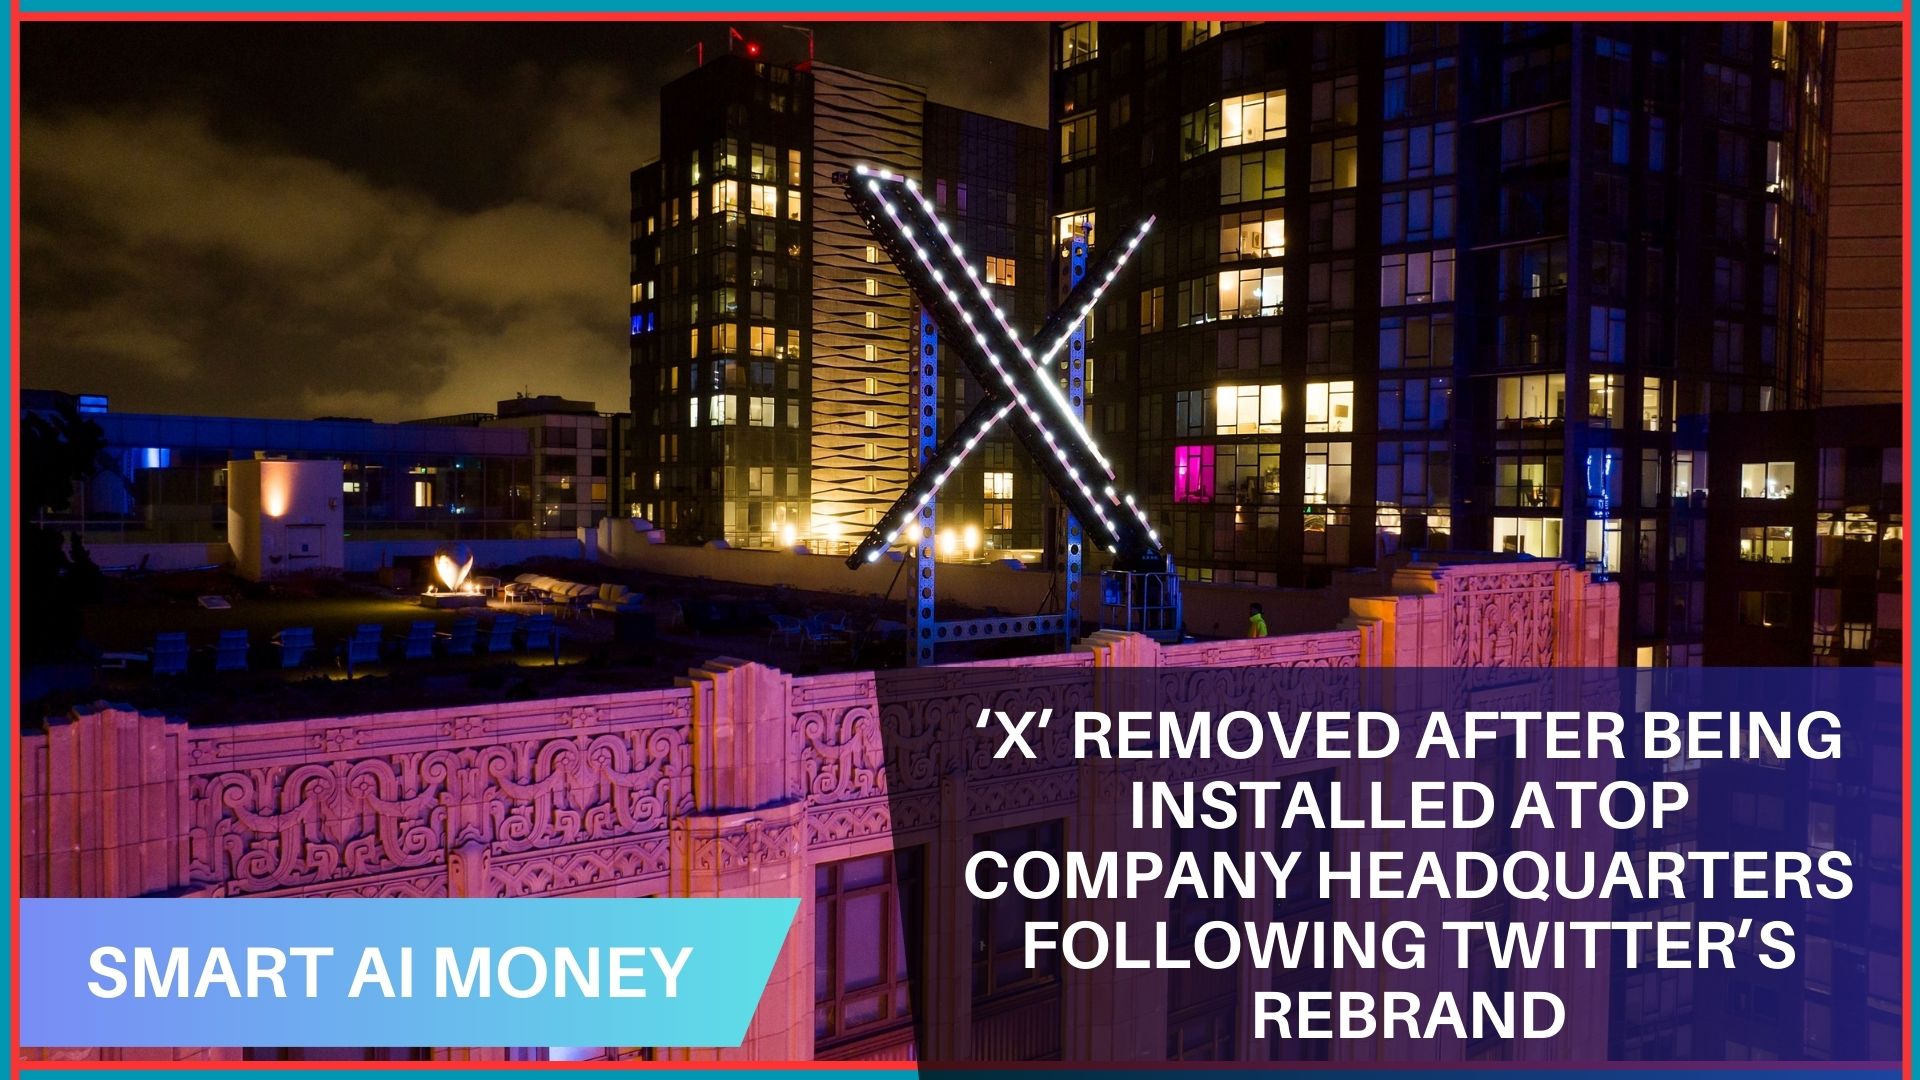 ‘X’ removed after being installed atop company headquarters following Twitter’s rebrand. The new illuminated "X" sign installed on top of Twitter's former headquarters in San Francisco was being dismantled by officials from the Department of Building Inspection after the company received a notice of violation for work without a permit.